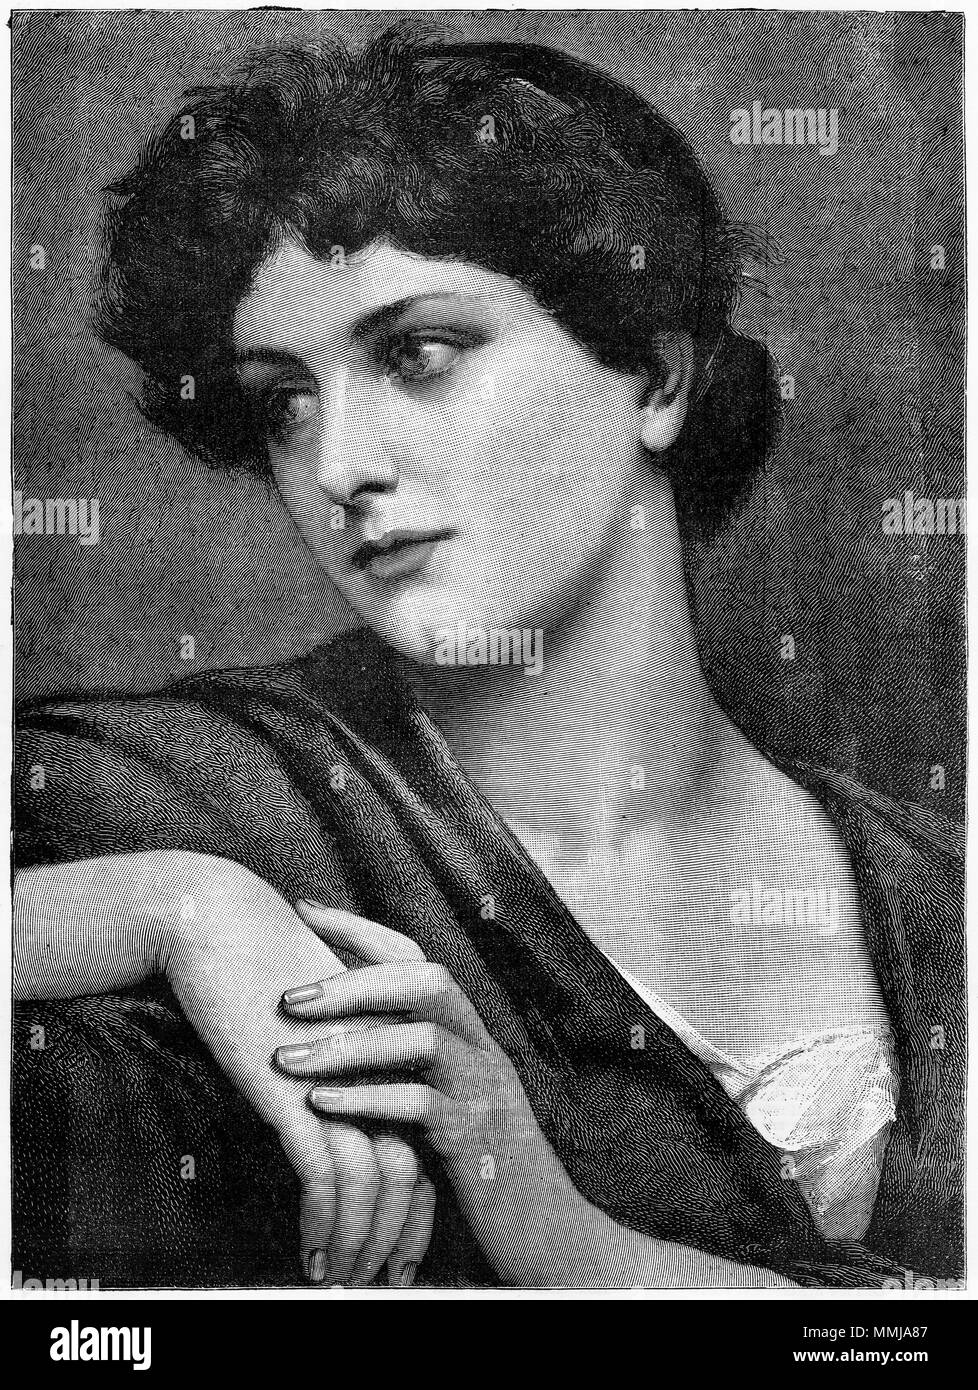 Engraving of a winsome young woman. From an original engraving in the Girl's Own Paper magazine 1883. Stock Photo